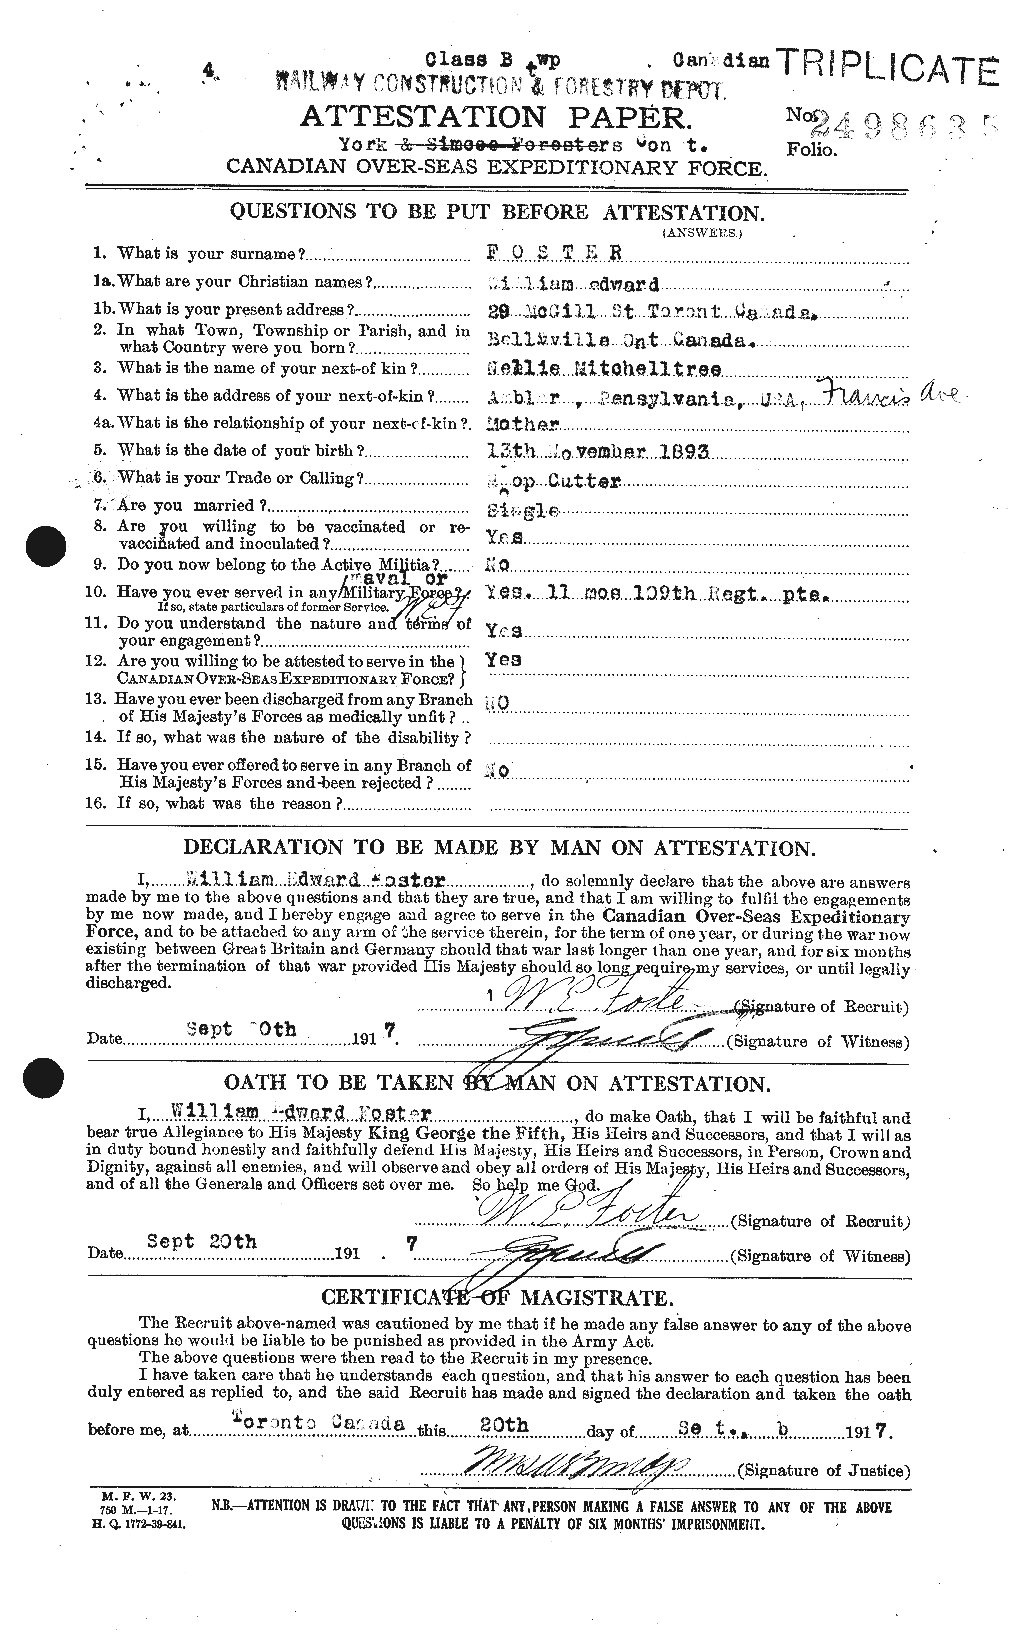 Personnel Records of the First World War - CEF 328738a